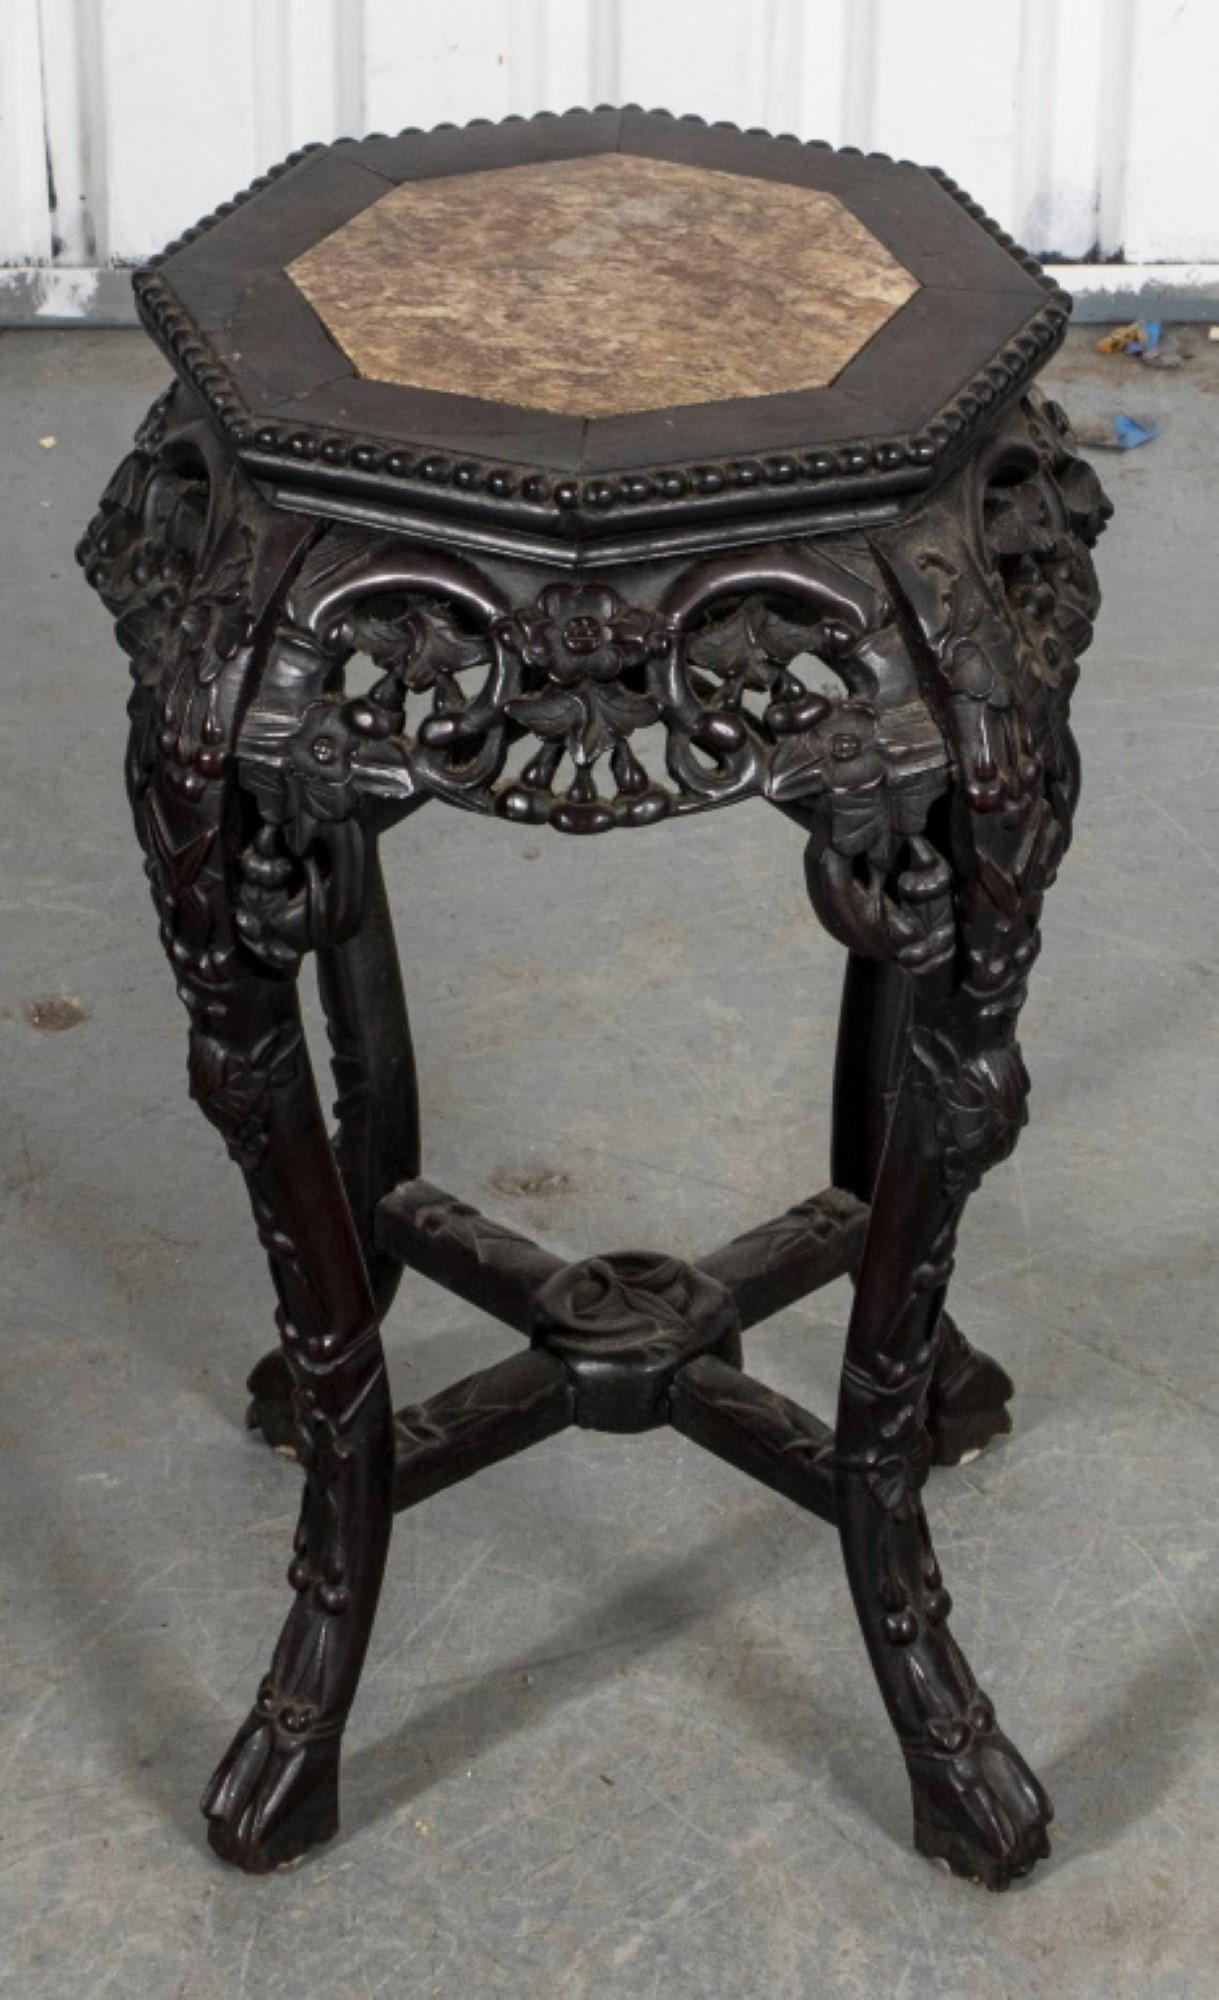 Exquisite Chinese carved hardwood jardiniere stand.

Boasting an octagonal top gracefully inlaid with a smooth marble slab.
The intricately carved frame and legs showcase a symphony of blooming flowers and delicate foliage, culminating in sturdy